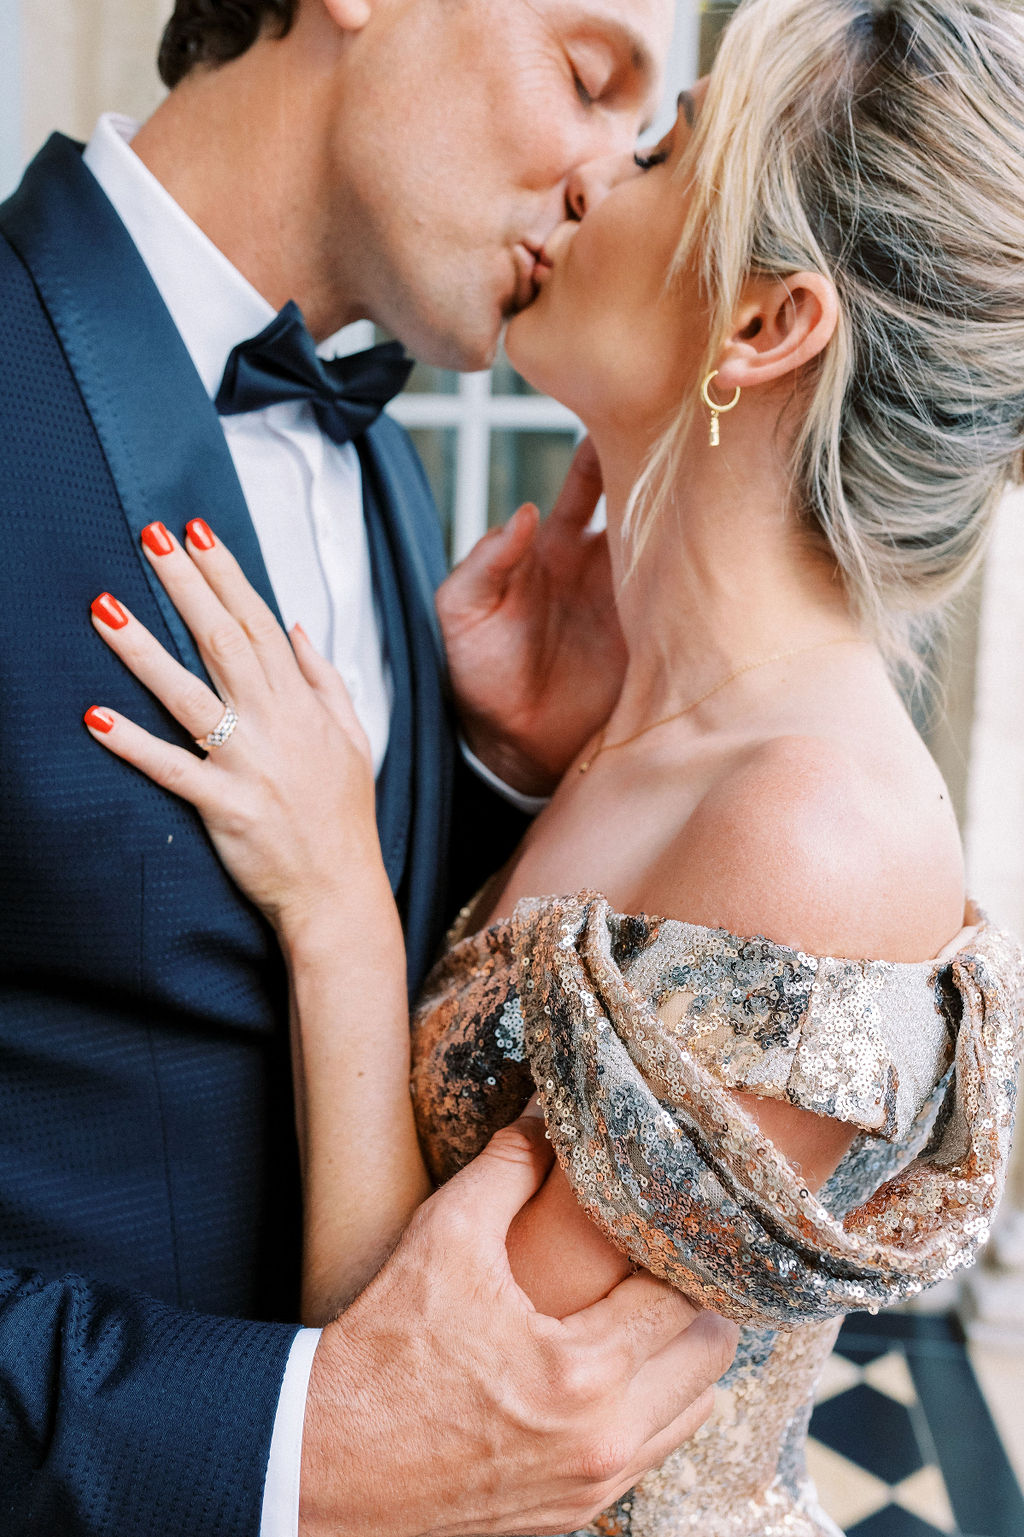 Romantic Australian bride and groom kissing after elopement